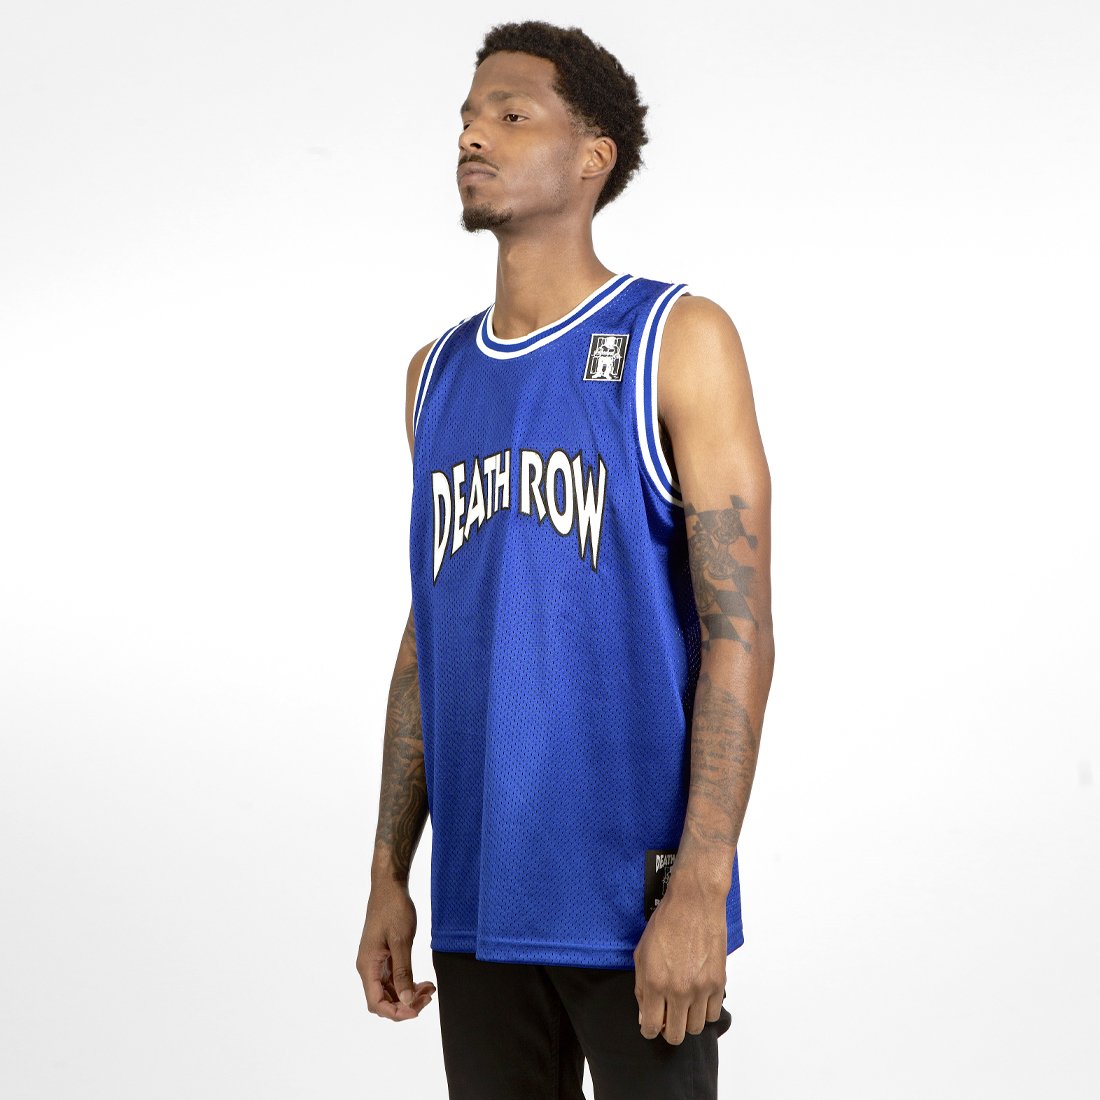 Death Row Records Purple Gold Basketball Jersey